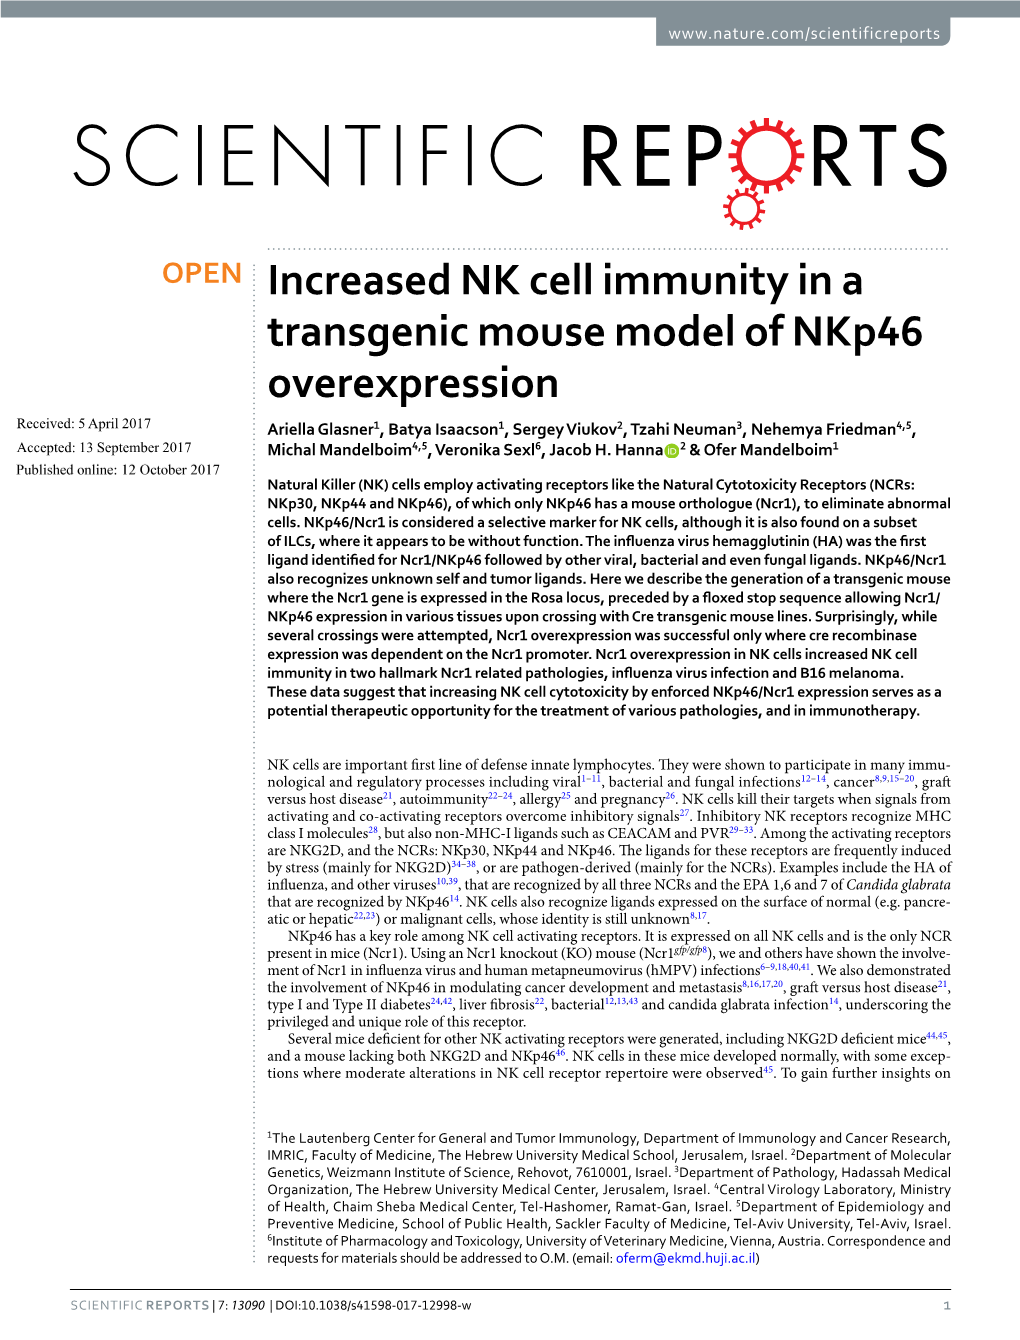 Increased NK Cell Immunity in a Transgenic Mouse Model of Nkp46